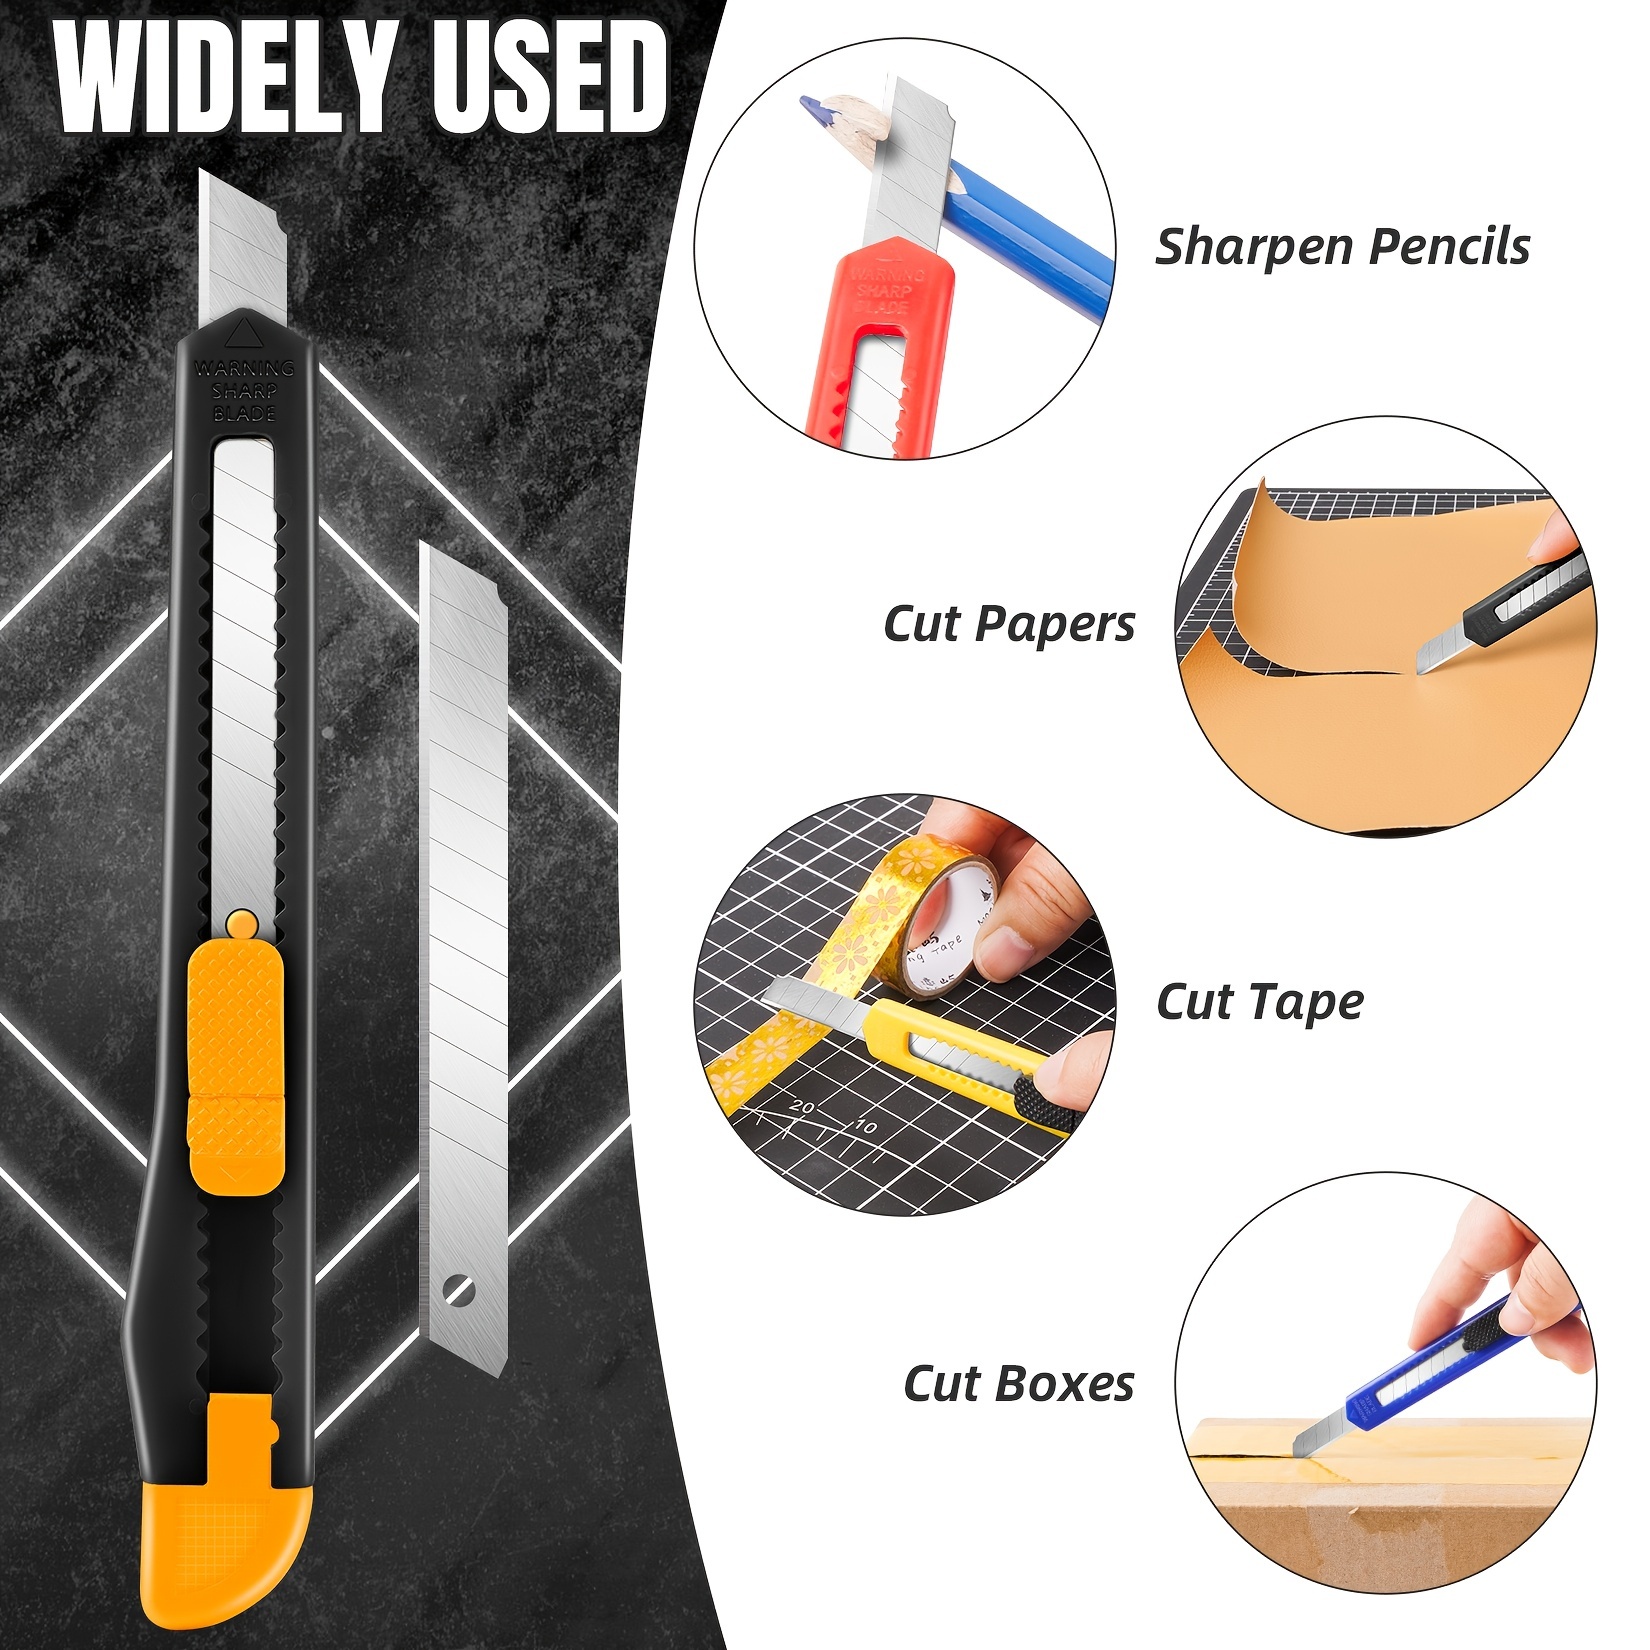 TIFICAL Box Cutter, 18MM Wide Blade Utility Knife for Boxes, Cartons,  Cardboard, Box Cutter Retractable Perfect for Office, Home, School, Crafts  Use